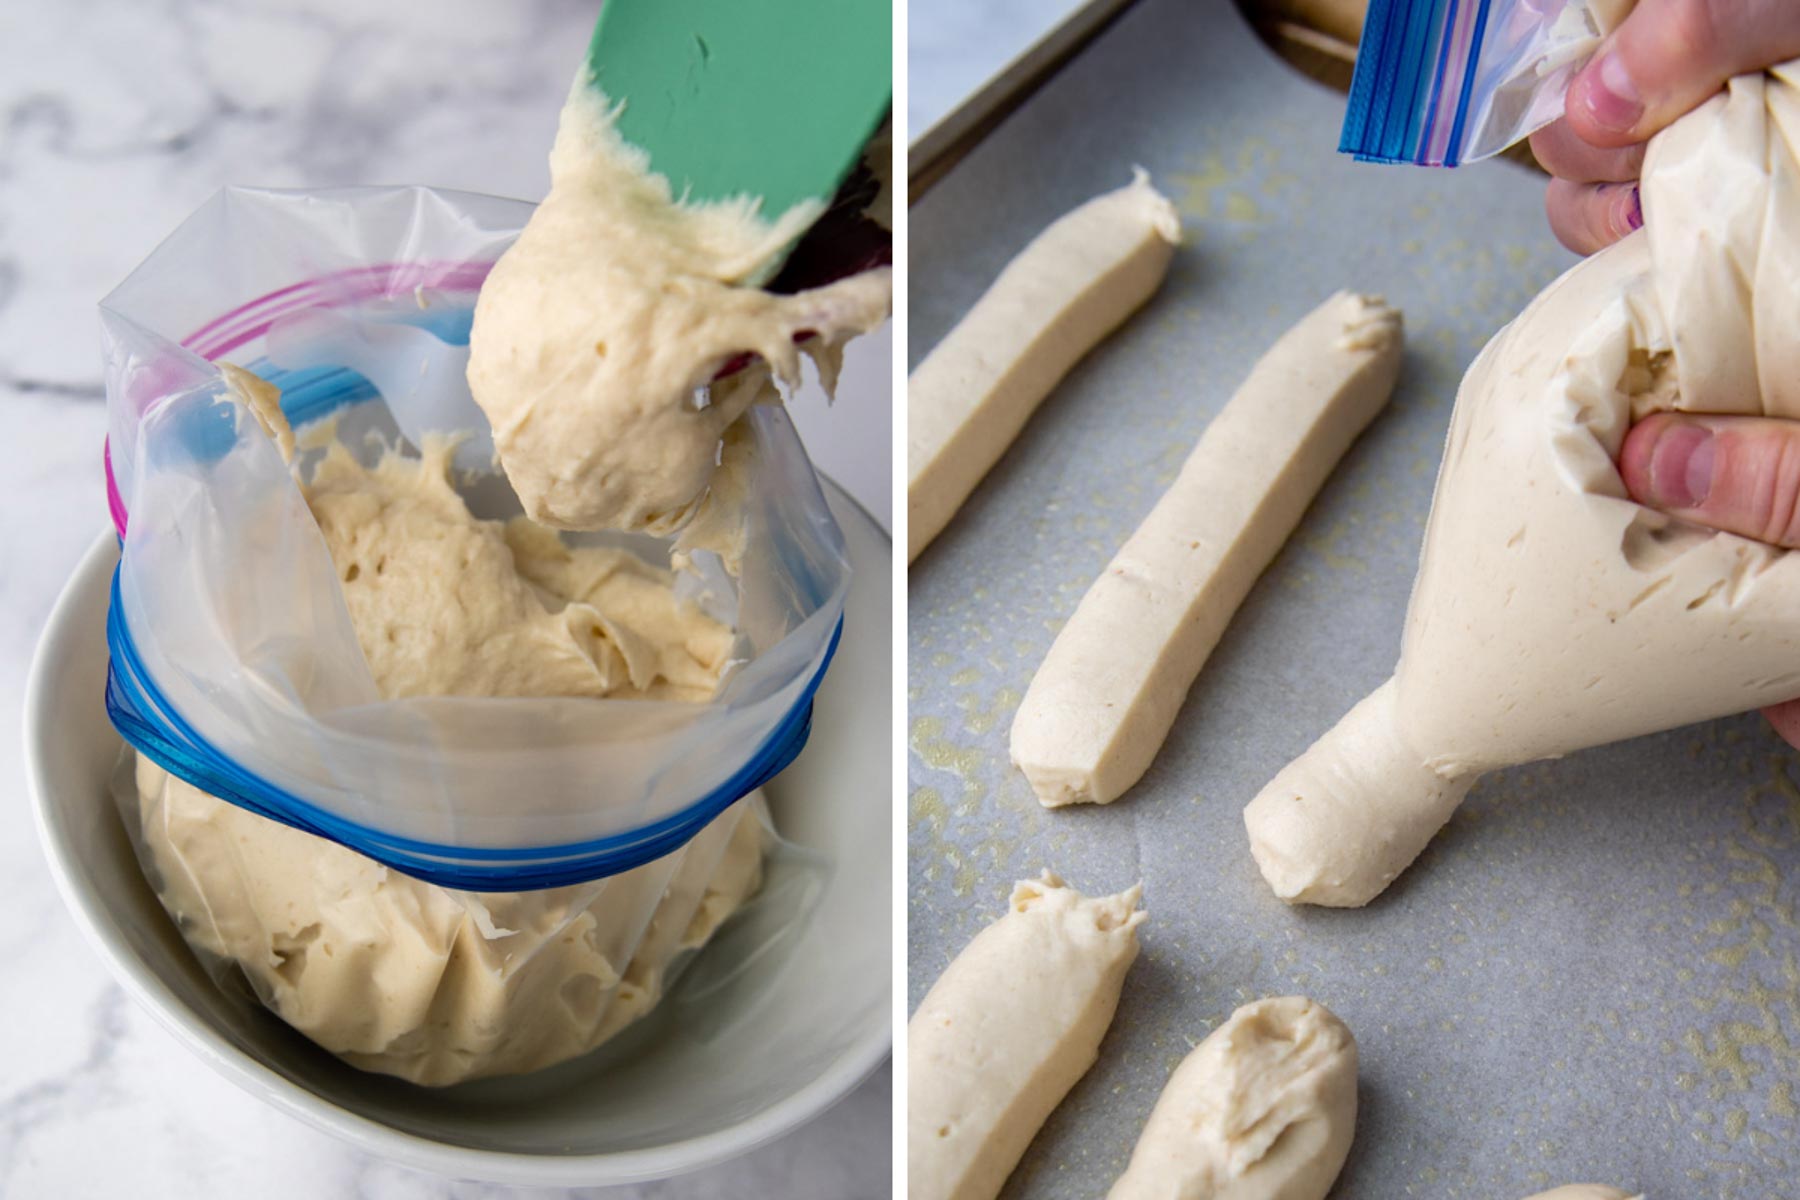 images showing how to pipe gluten-free breadsticks onto the pan